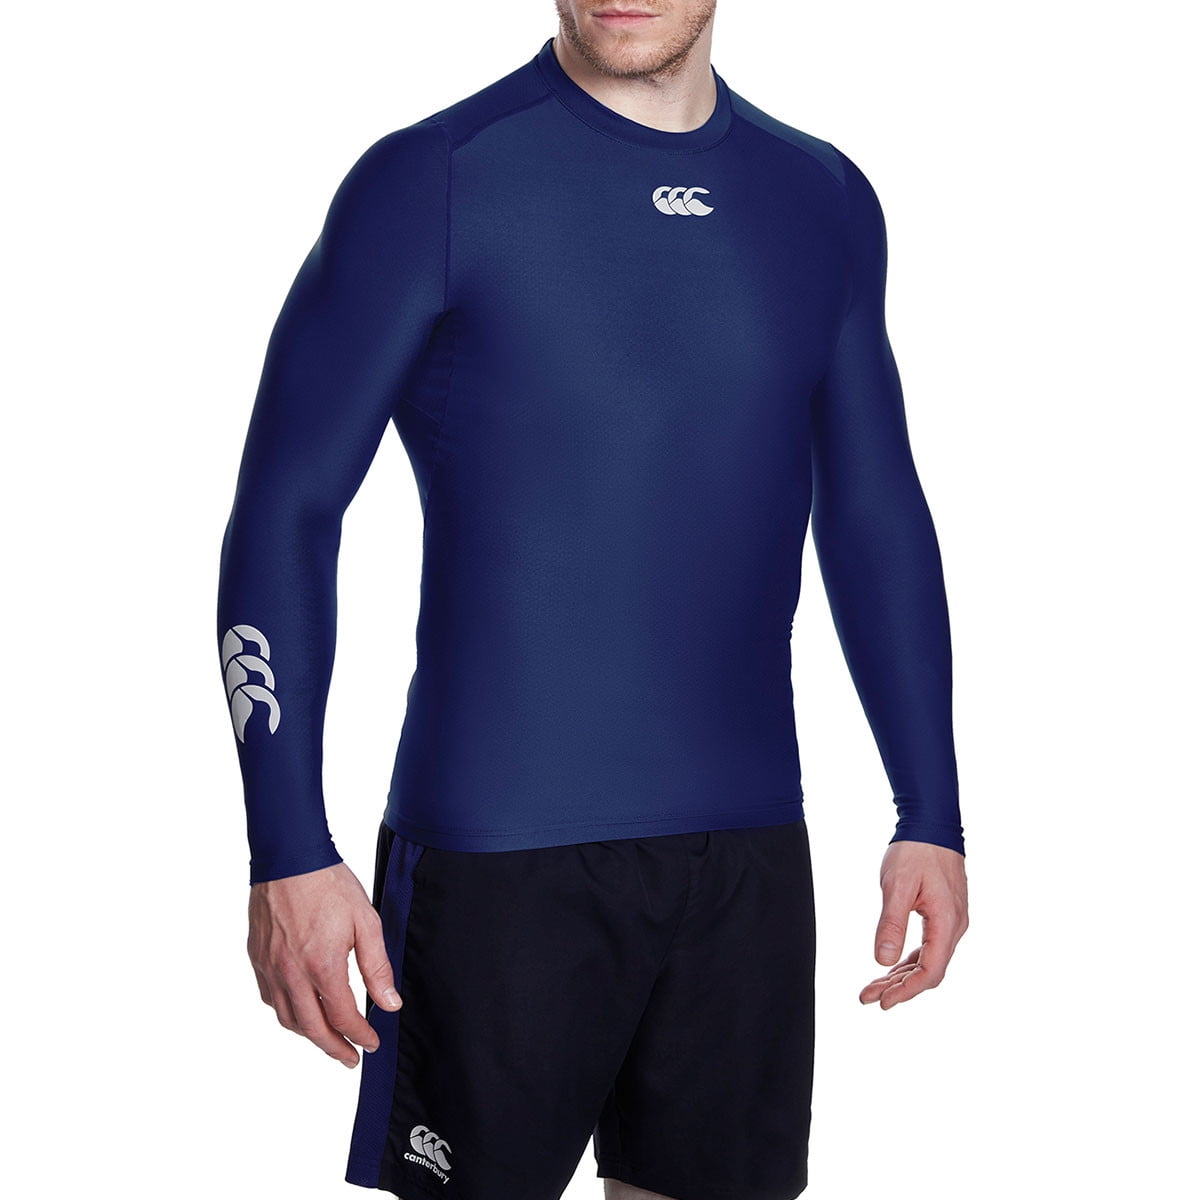 Canterbury Mens Tech Top Baselayer Compression Armor Thermal Skins Long Sleeve 